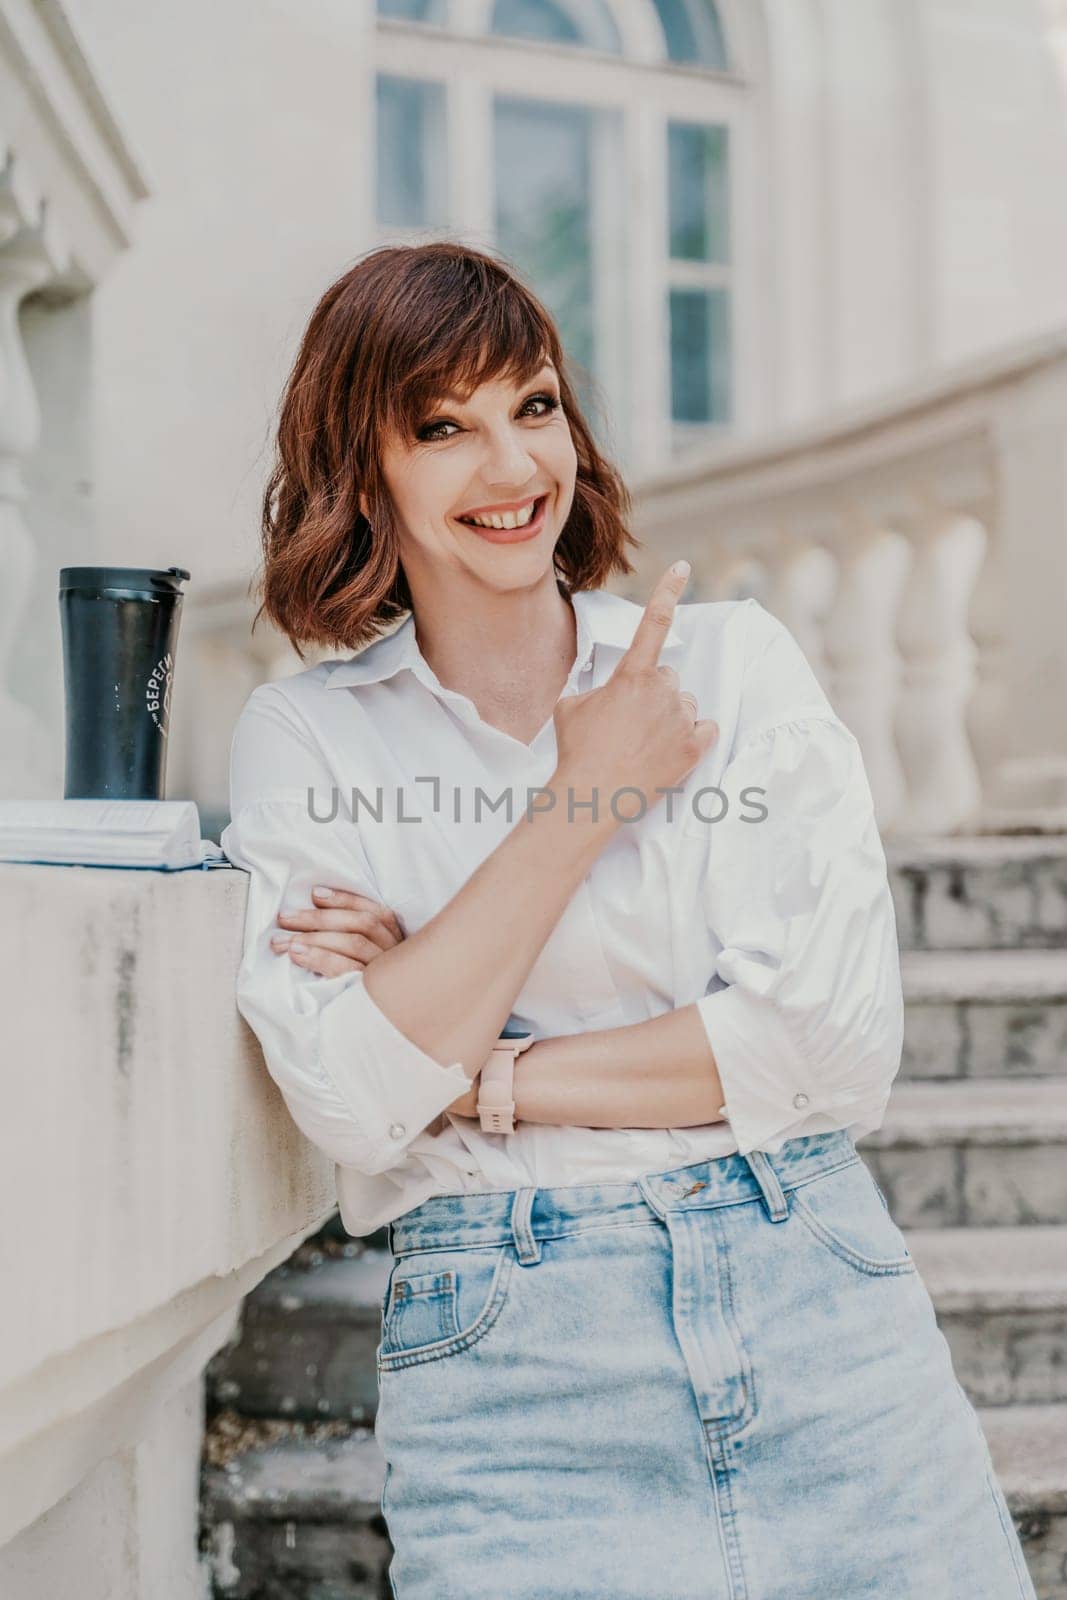 Woman building city. A business woman in a white shirt and denim skirt stands leaning against the wall on the steps of an ancient building in the city by Matiunina